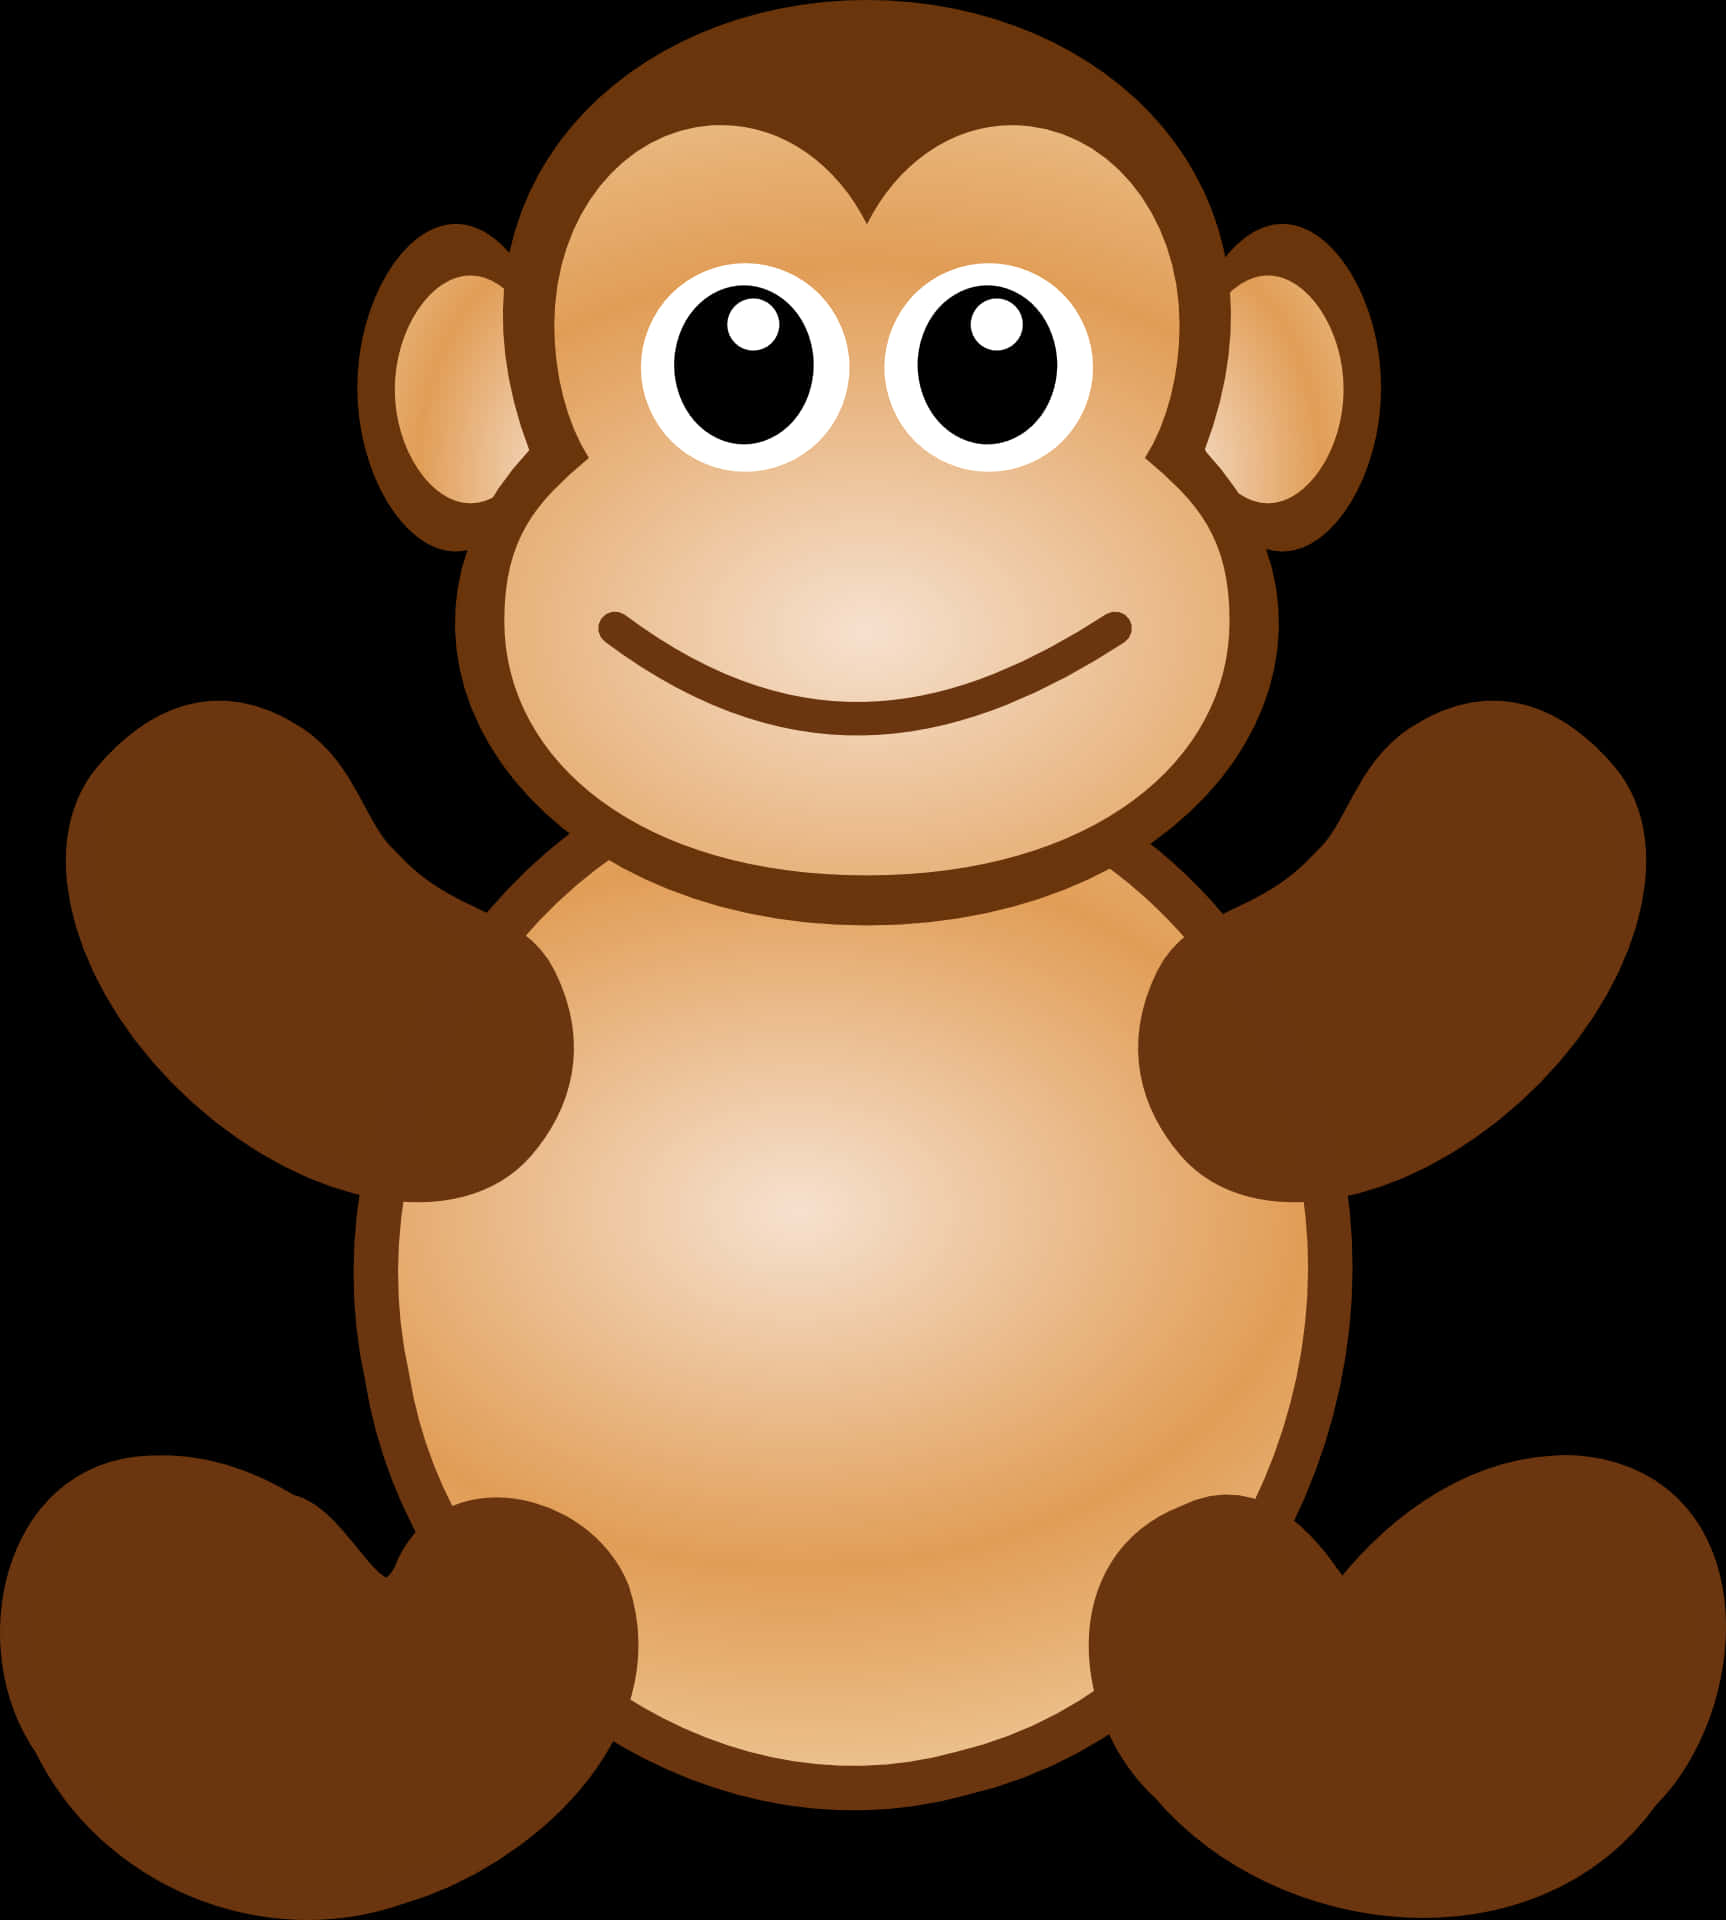 Curious George Cartoon Monkey PNG image